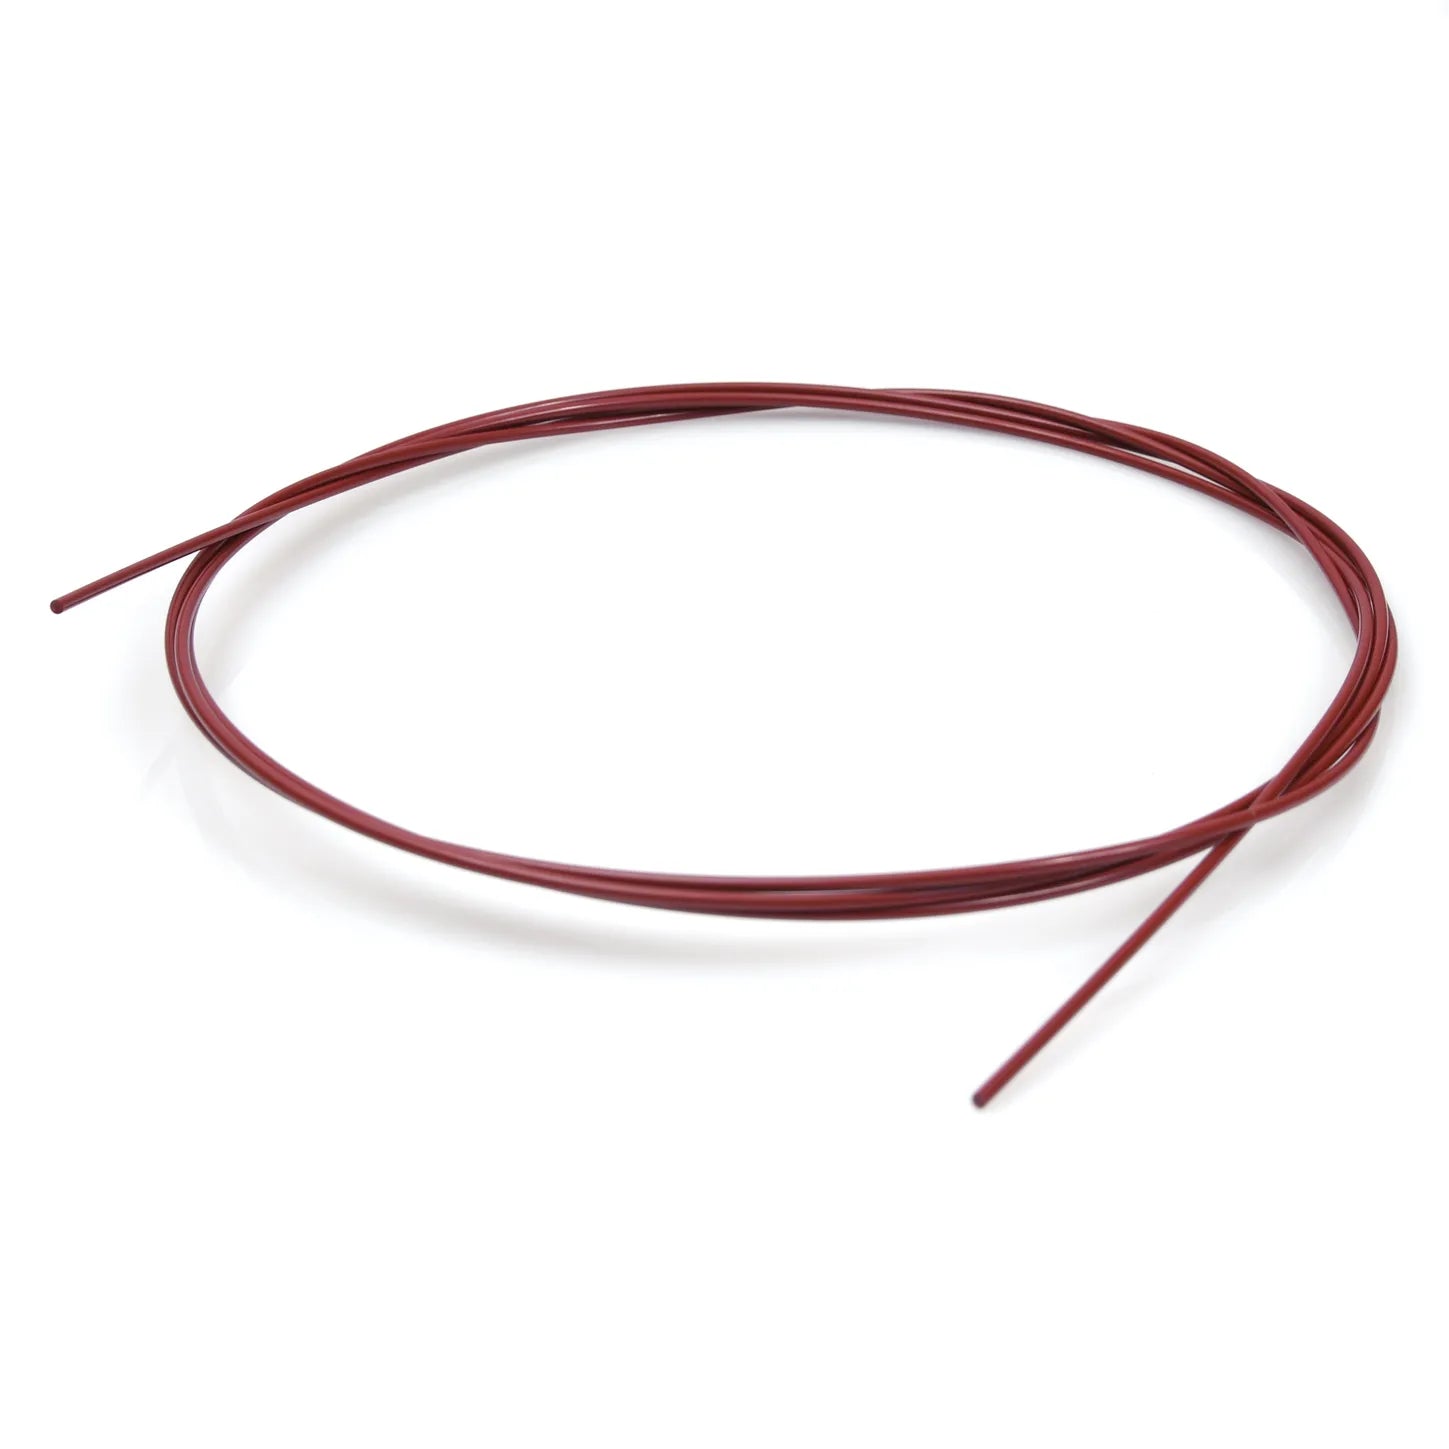 Red PEEK™ Tubing, 0.005" ID X 1/16" OD, 5ft., Comparable to Shimadzu # 228-33833-91